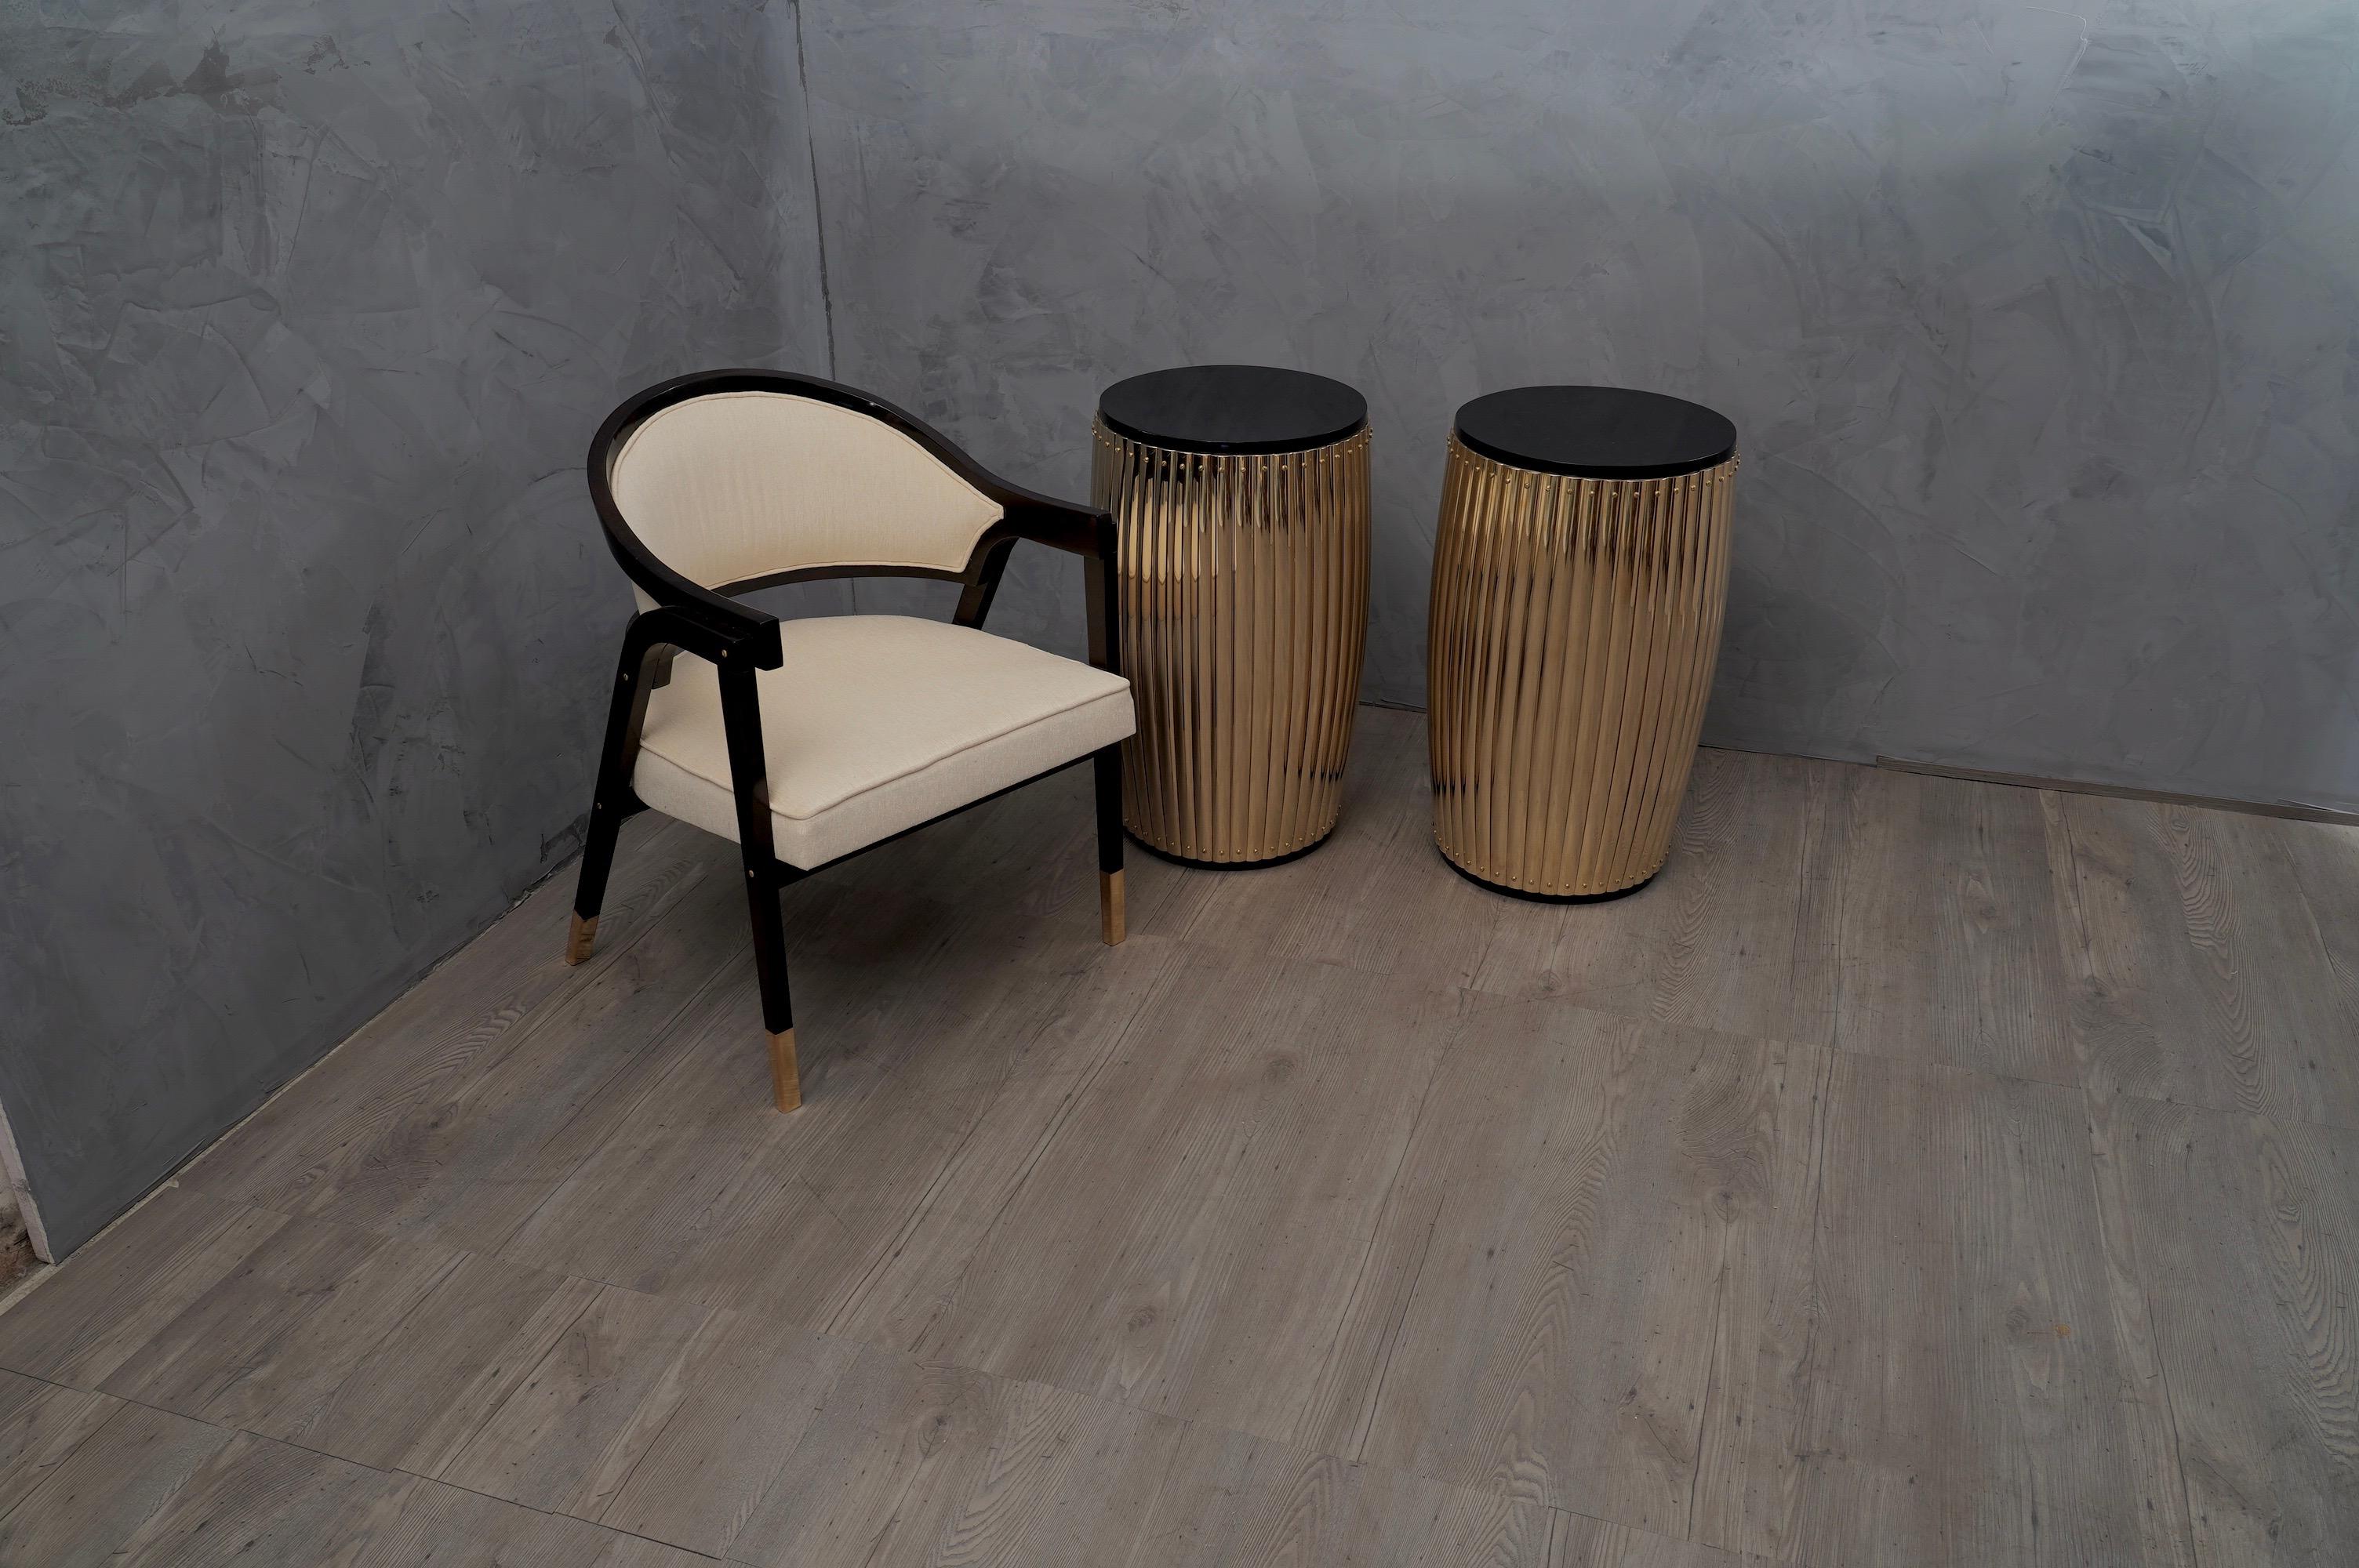 Couple of stylish side tables, is very clean and architectural in its shape, but precisely this combination brings out a very elegant and unmistakable design. This slick material turns this table into a modernist sculpture with round shape. 

The